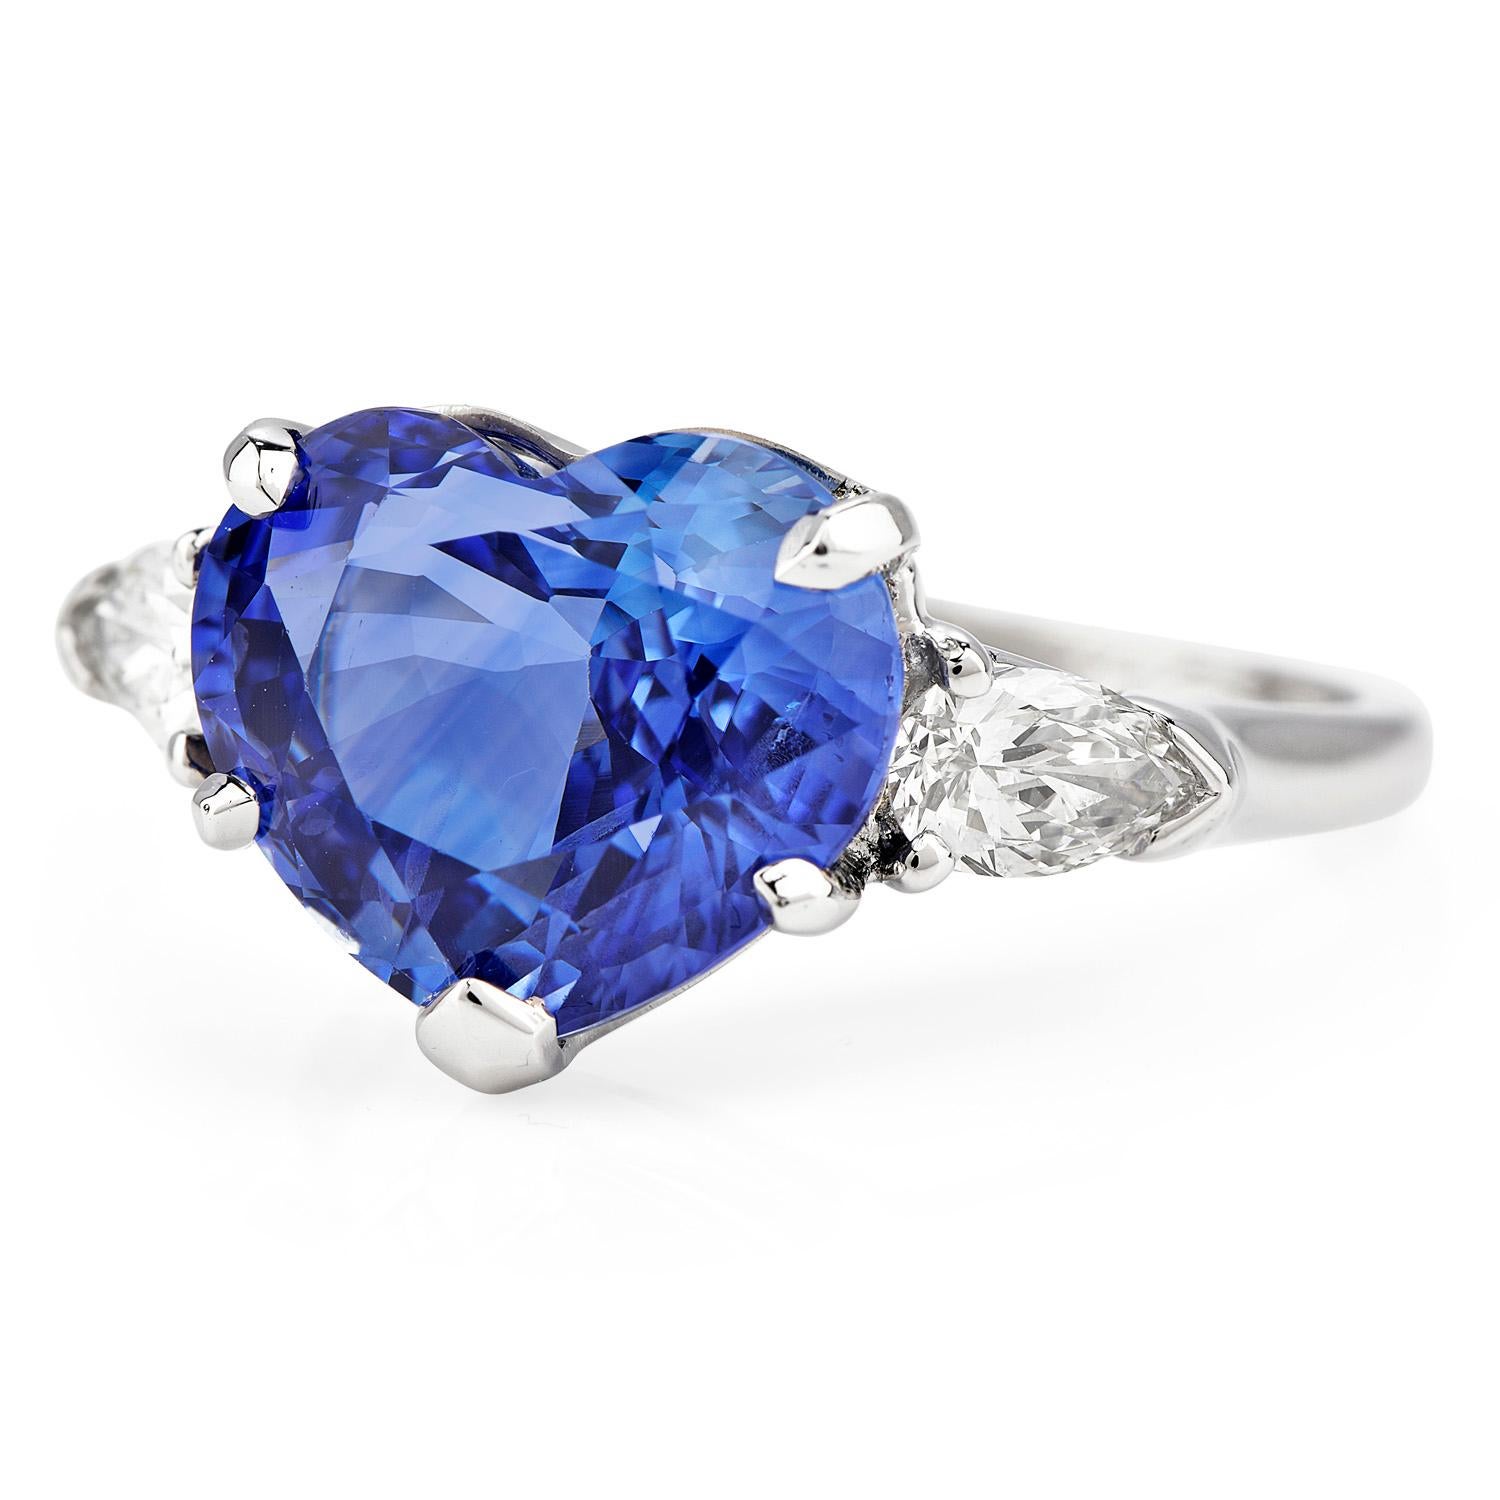 Reminiscent of the famous Heart of the Ocean piece in the Titanic.

Carefully crafted in solid Platinum, Featuring Vibrant GIA certified

Natural Curundom Blue Sri Lankan Sapphire Heart-cut, prong-set, weighing 6.02 carats, Measuring 9.70 x 11.60 x